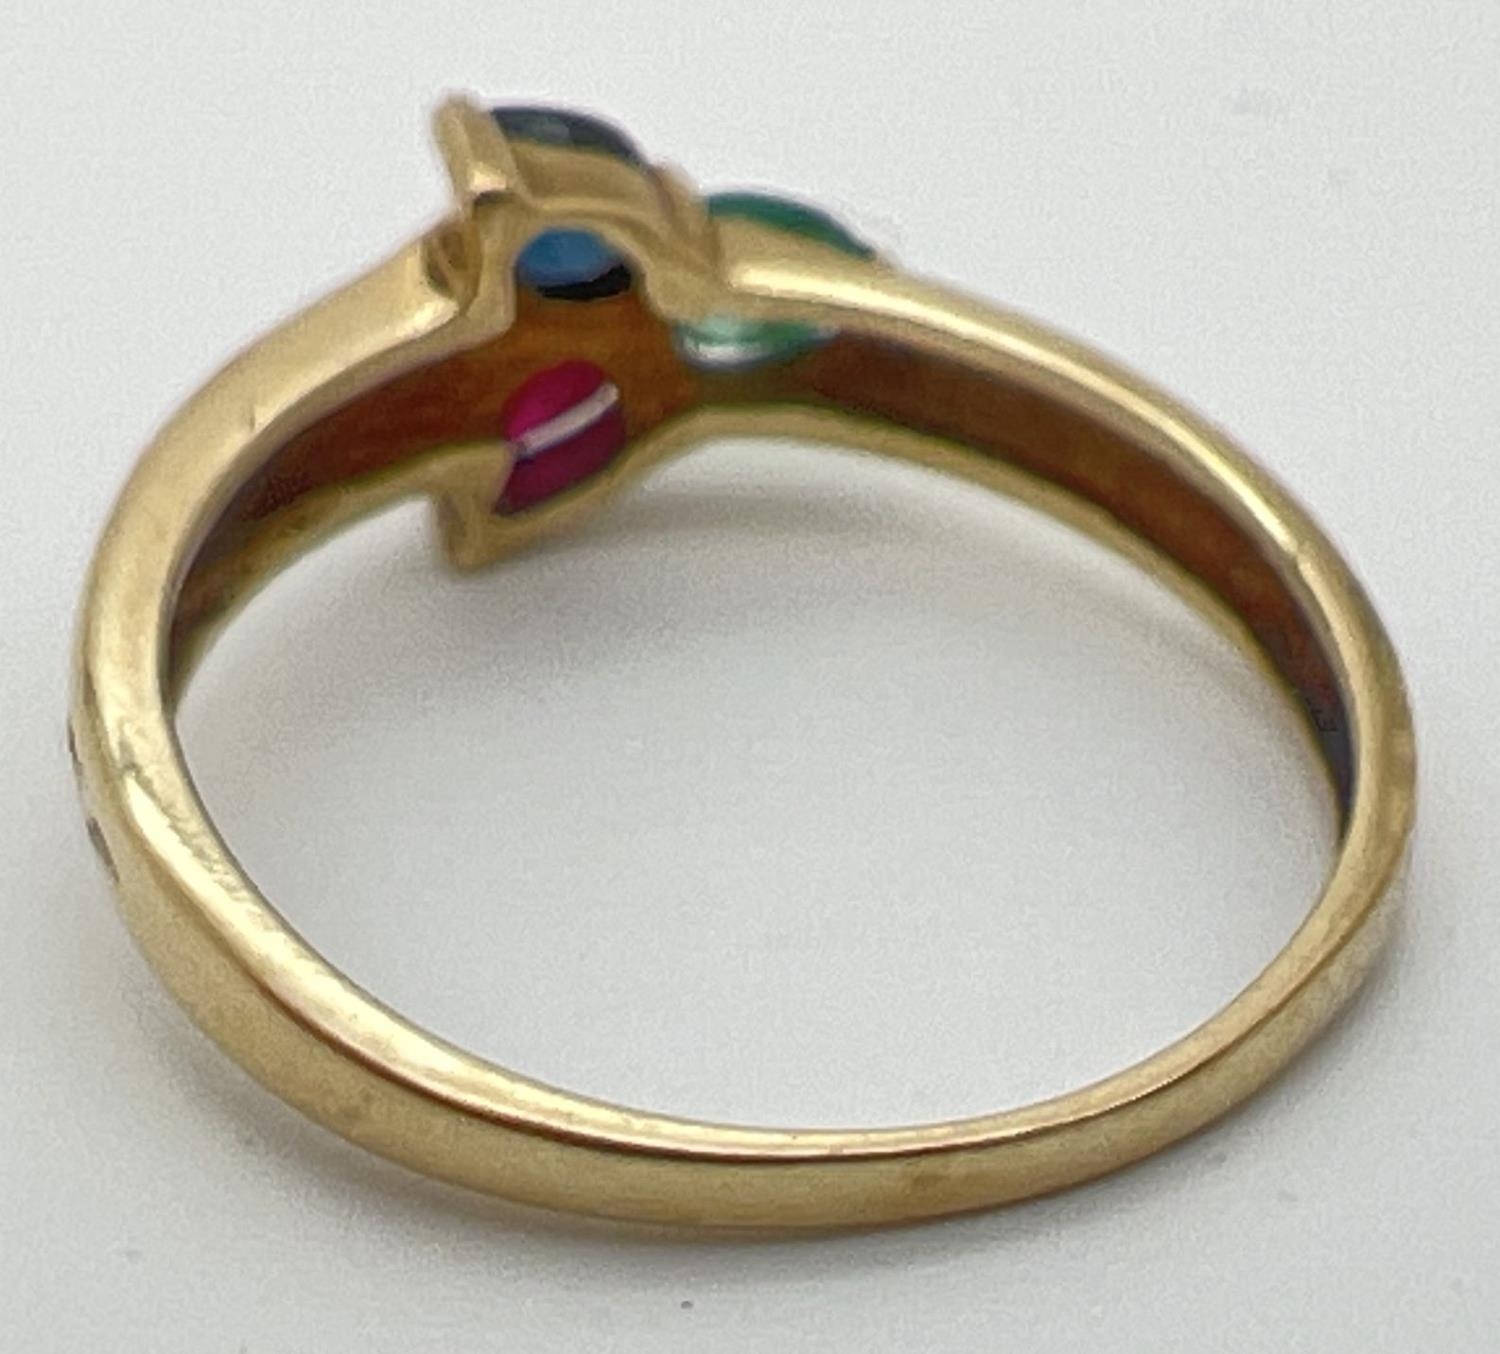 A 9ct yellow gold multi stone trinity ring with a pear cut emerald, sapphire & ruby in a 3 point - Image 3 of 4